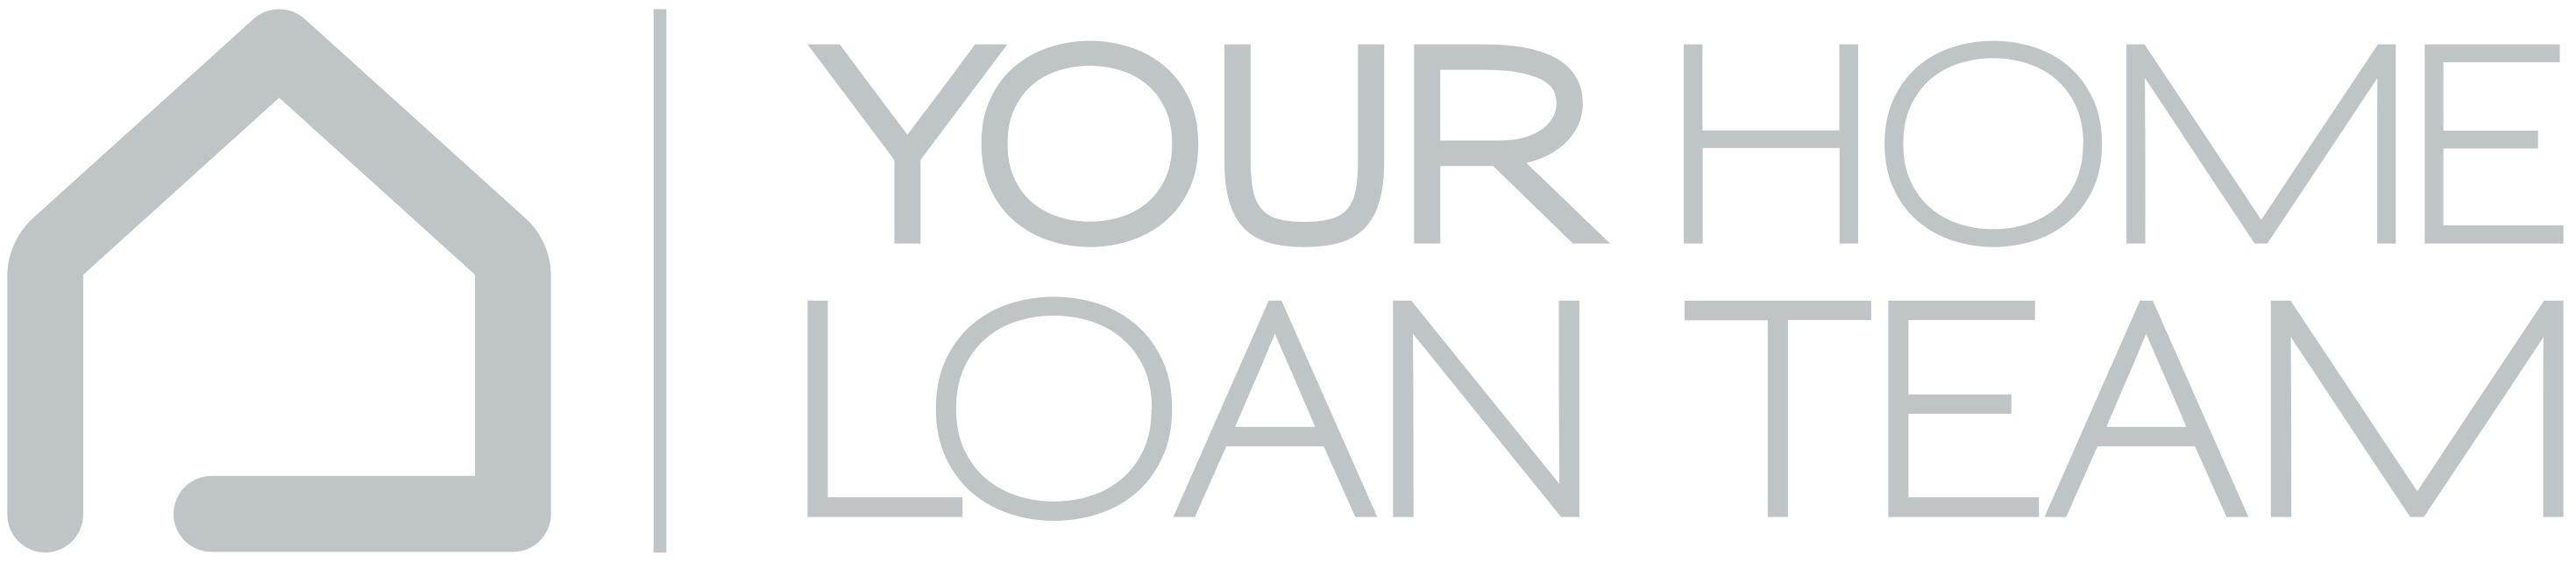 Your Home Loan Team